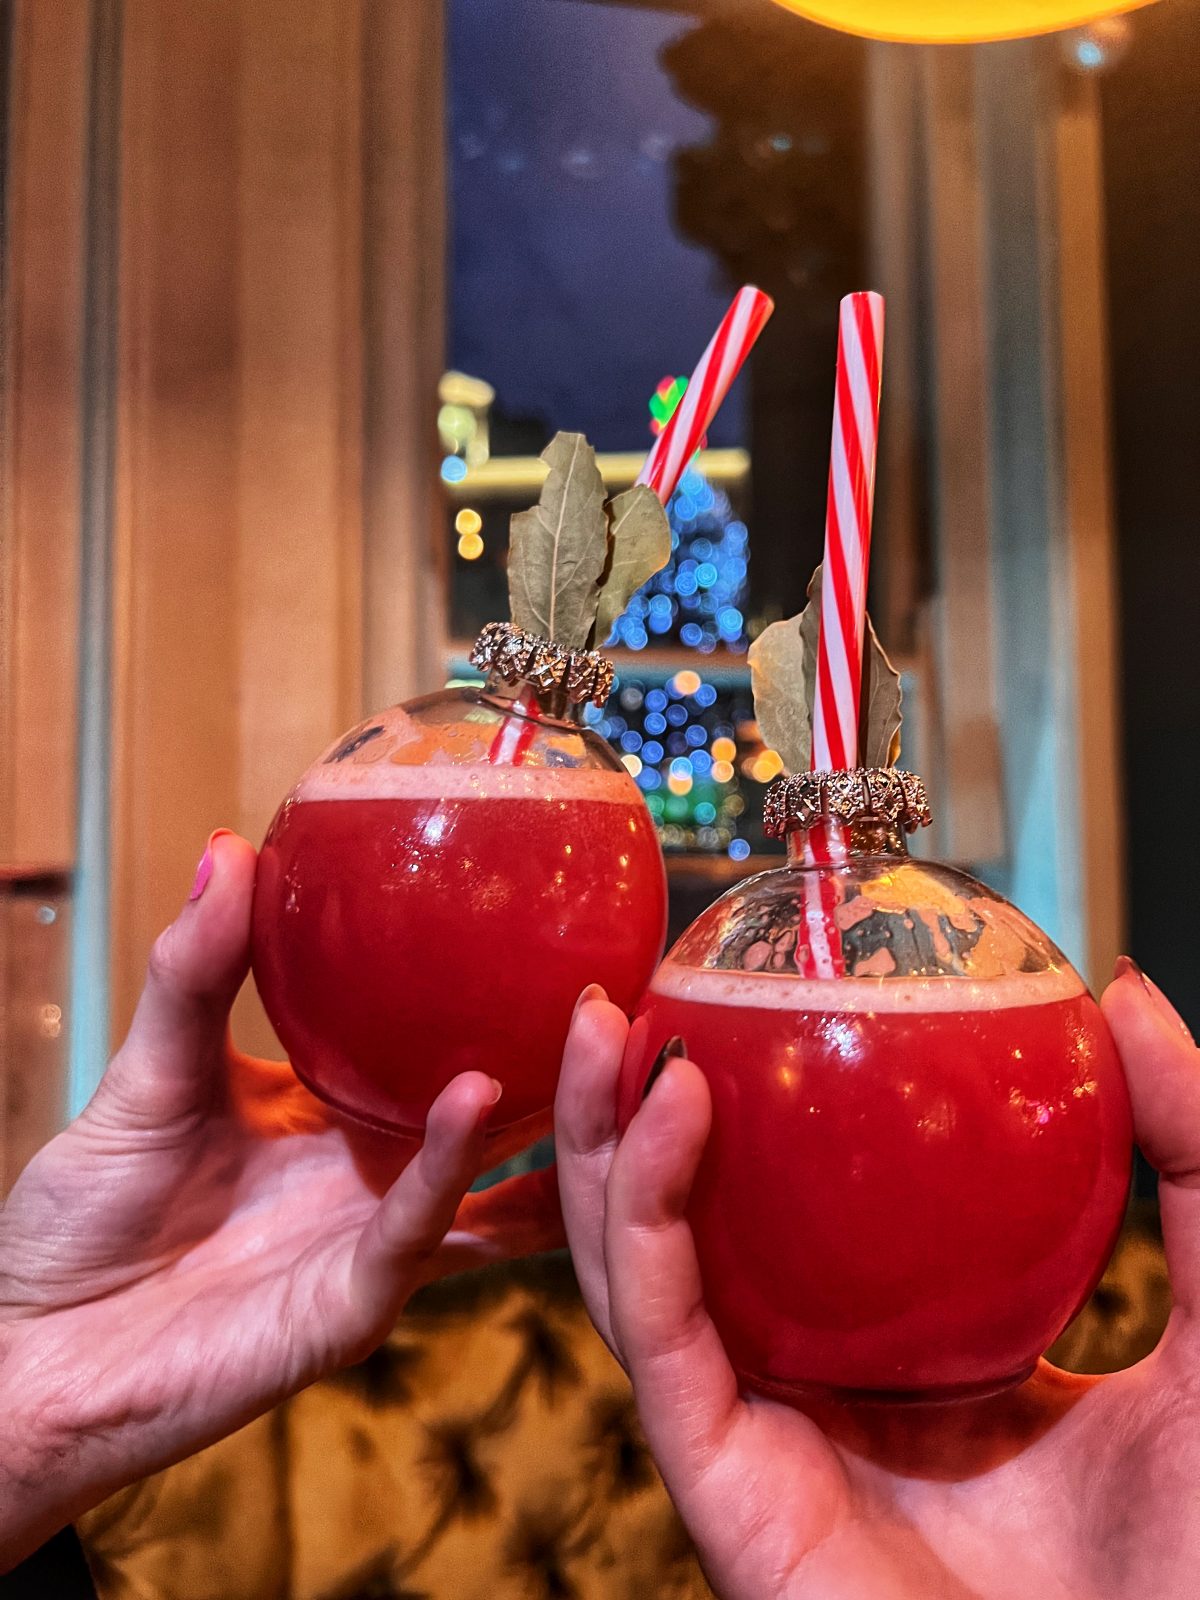 cocktails in bauble-shaped glasses.